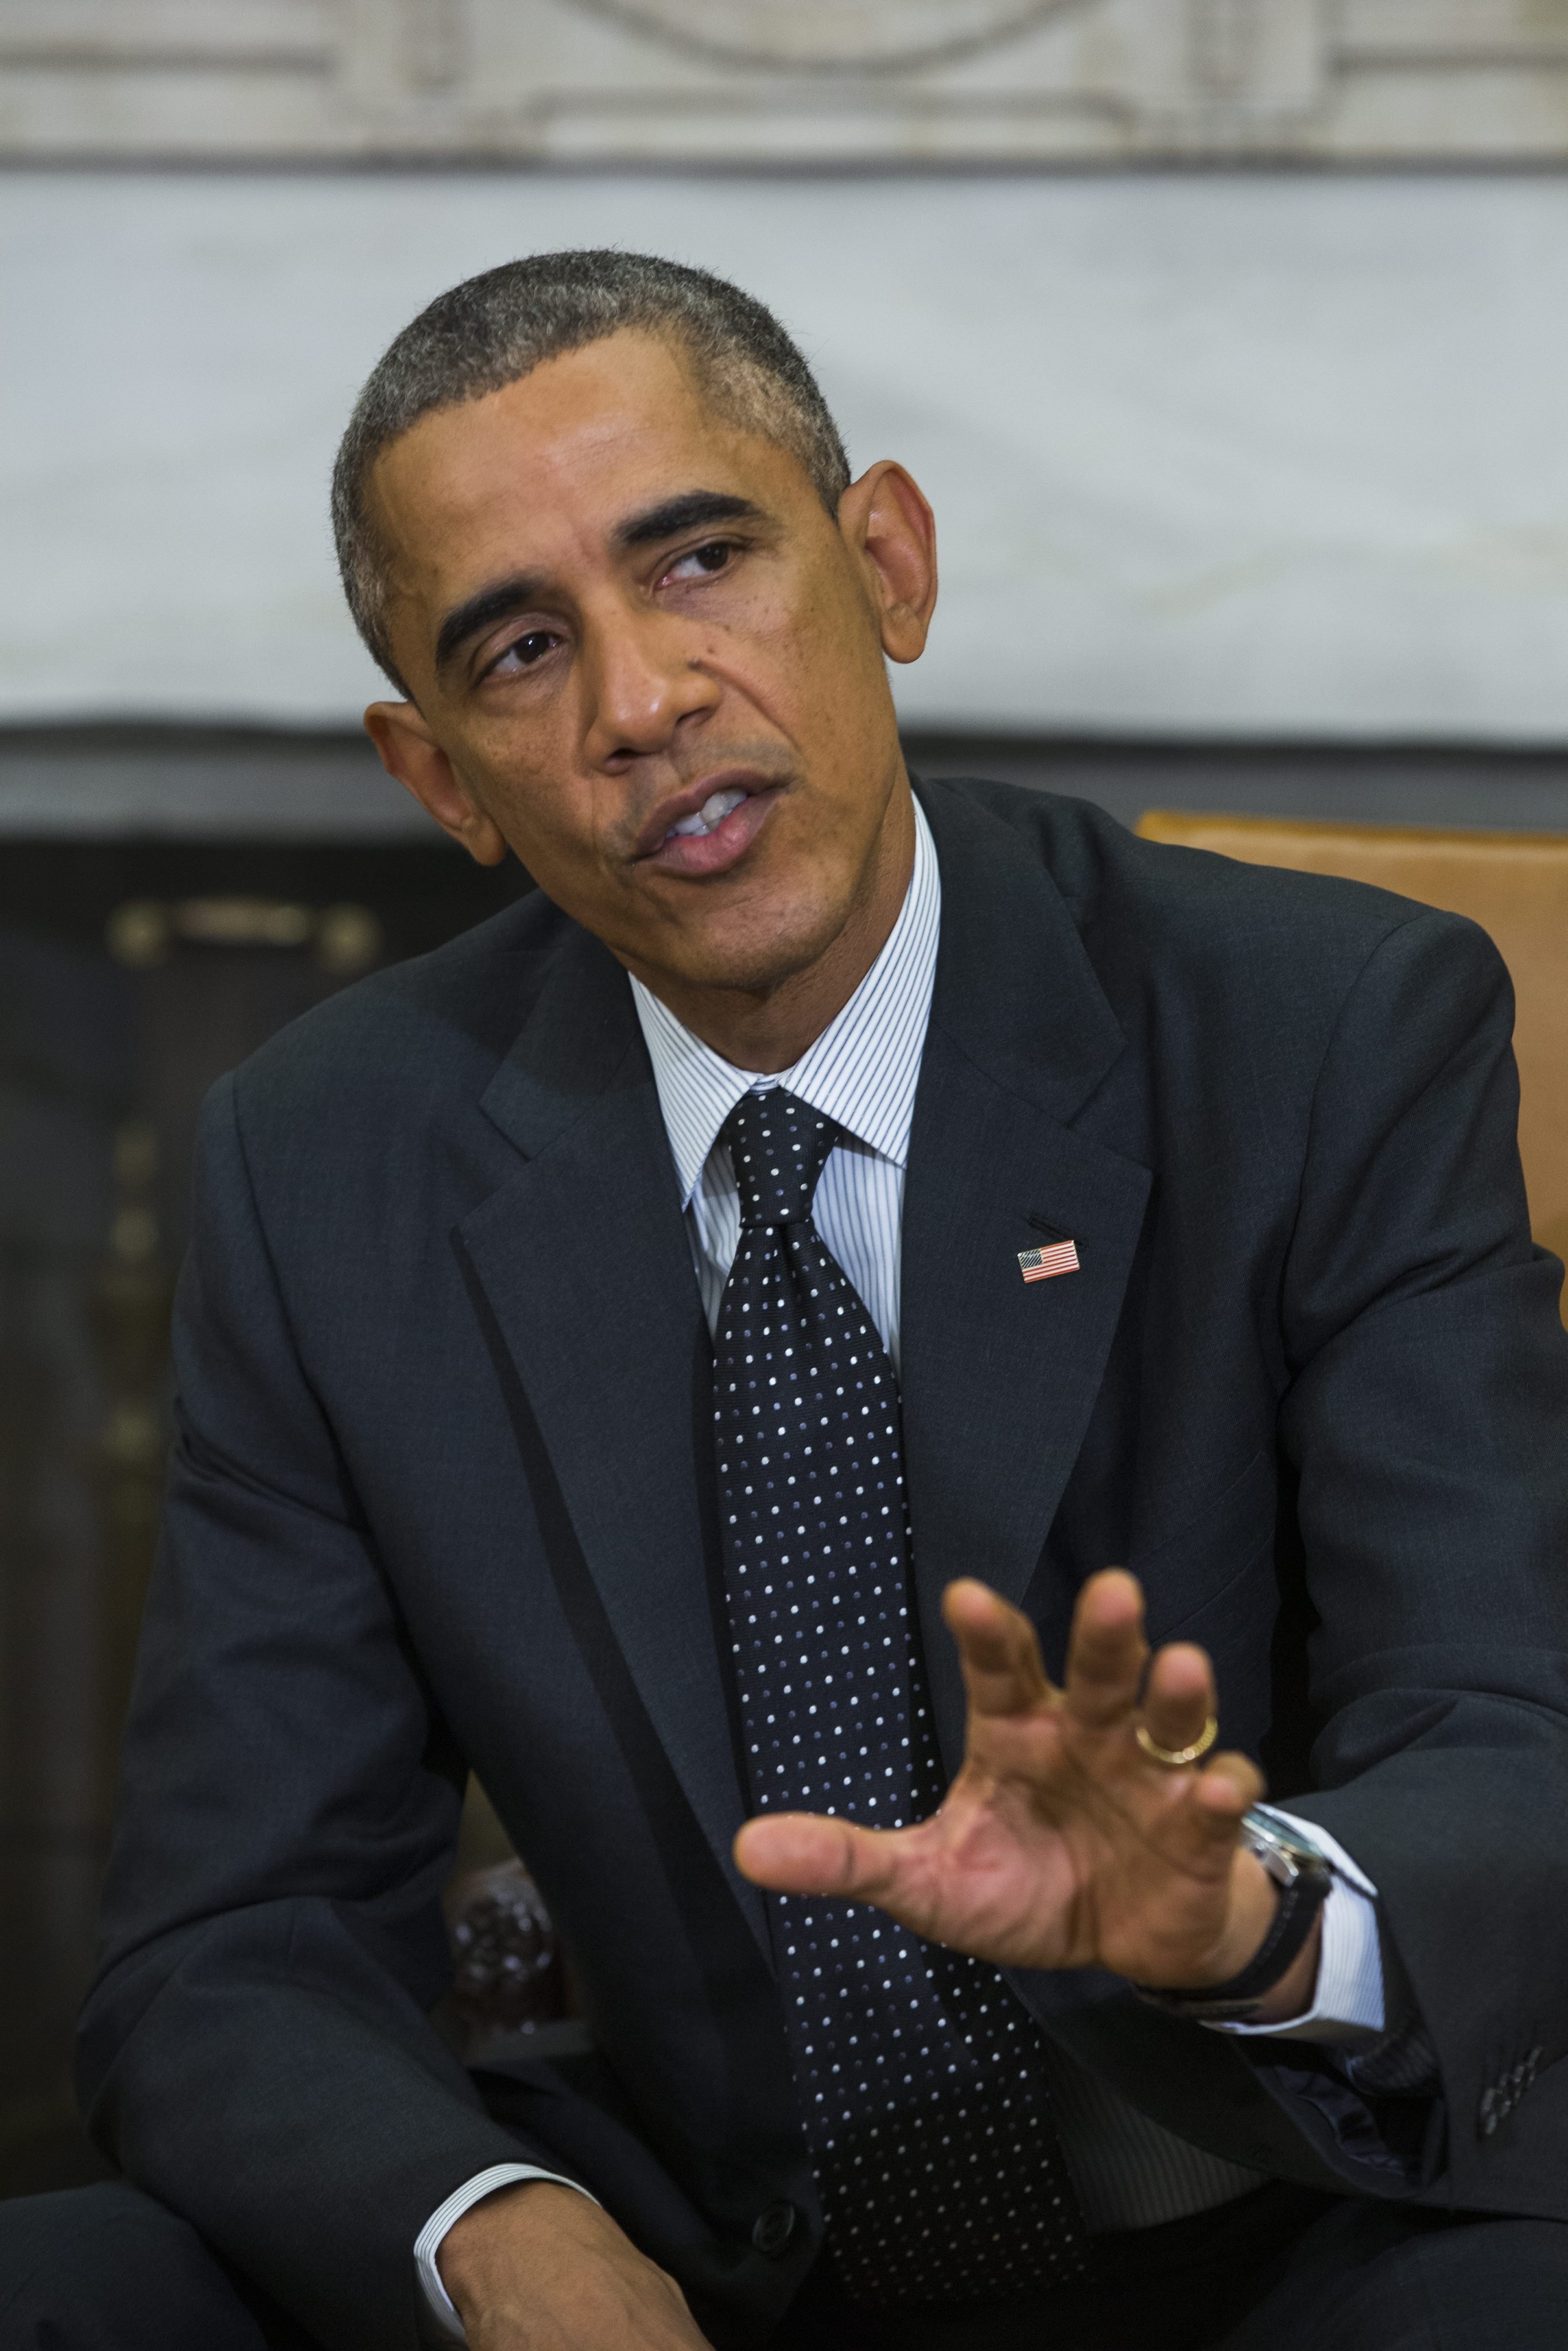 President Barack Obama speaks to the media after holding a meeting with his newly-appointed 'Ebola Response Coordinator' Ron Klain, along with other members of the team coordinating the Obama administration's ebola response efforts, in the Oval Office of the White House in Washington on Oct. 22, 2014.